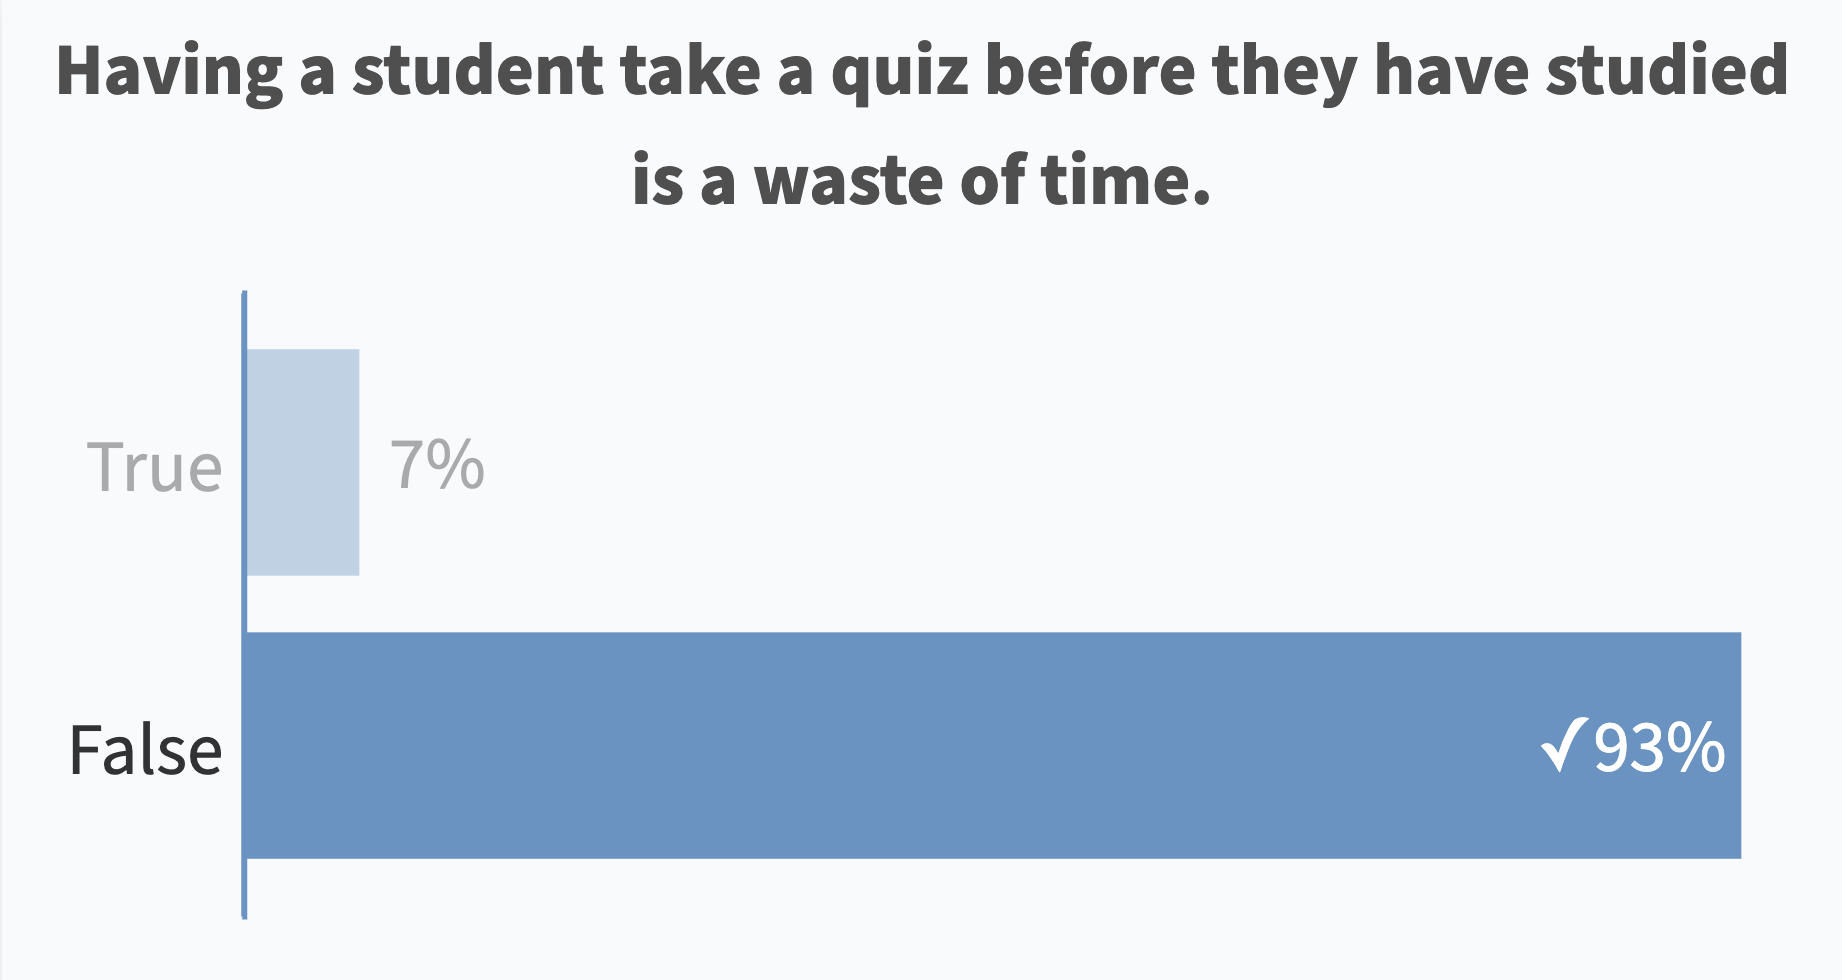 Having a student take a quiz before they have studied is a waste of time. (False: 93% correct)